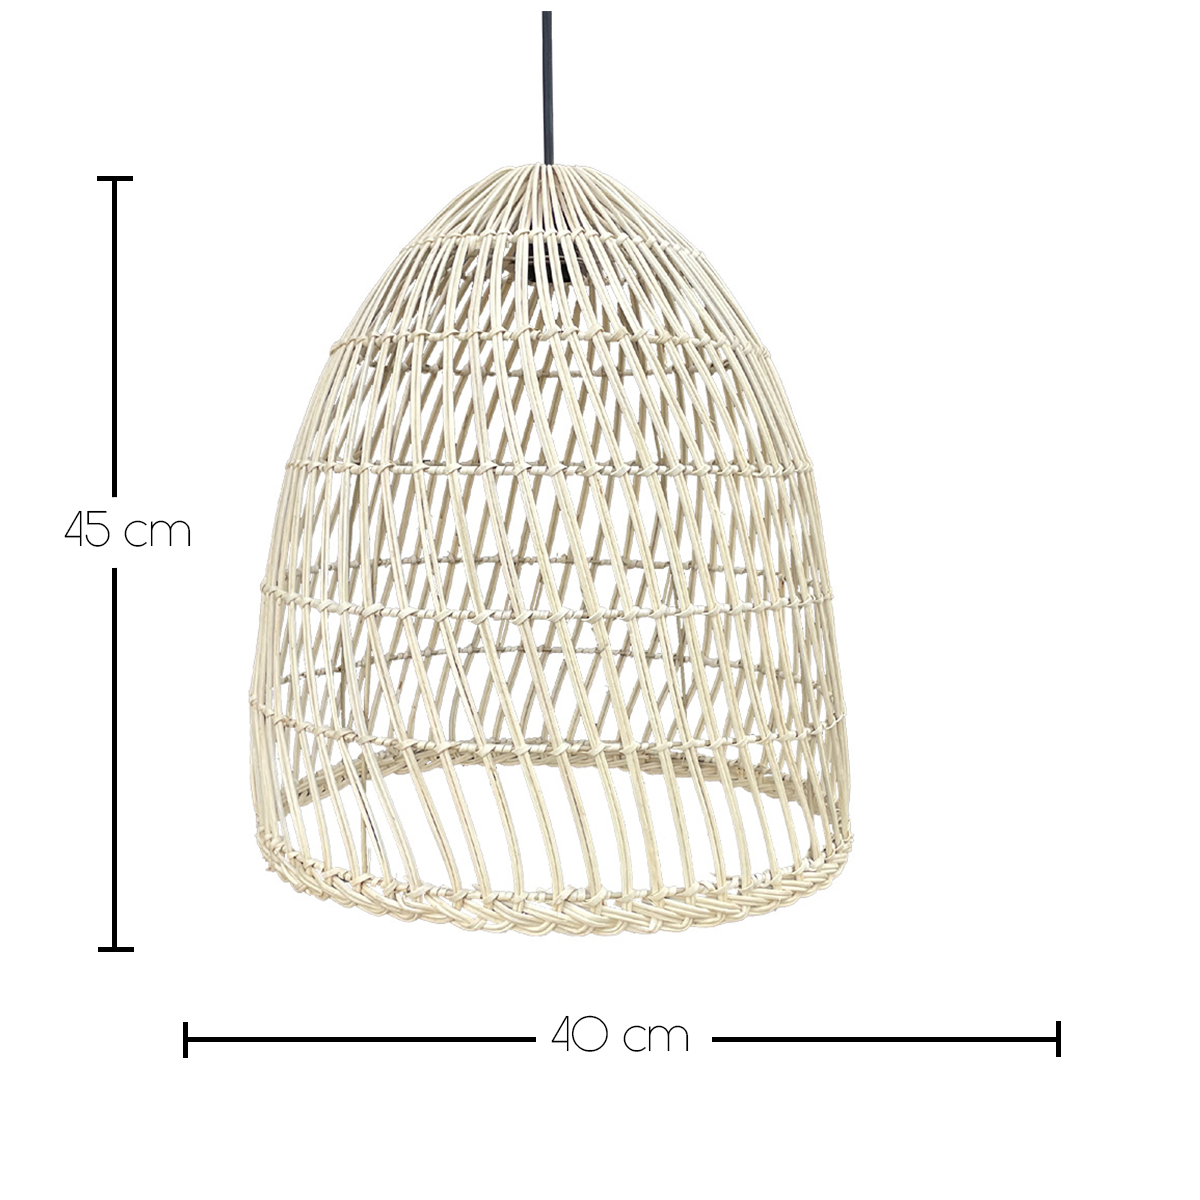 Mains-powered pendant lamp for outdoor use PAULO OUTDOOR CABLE in natural rattan bohemian style 5m cable length